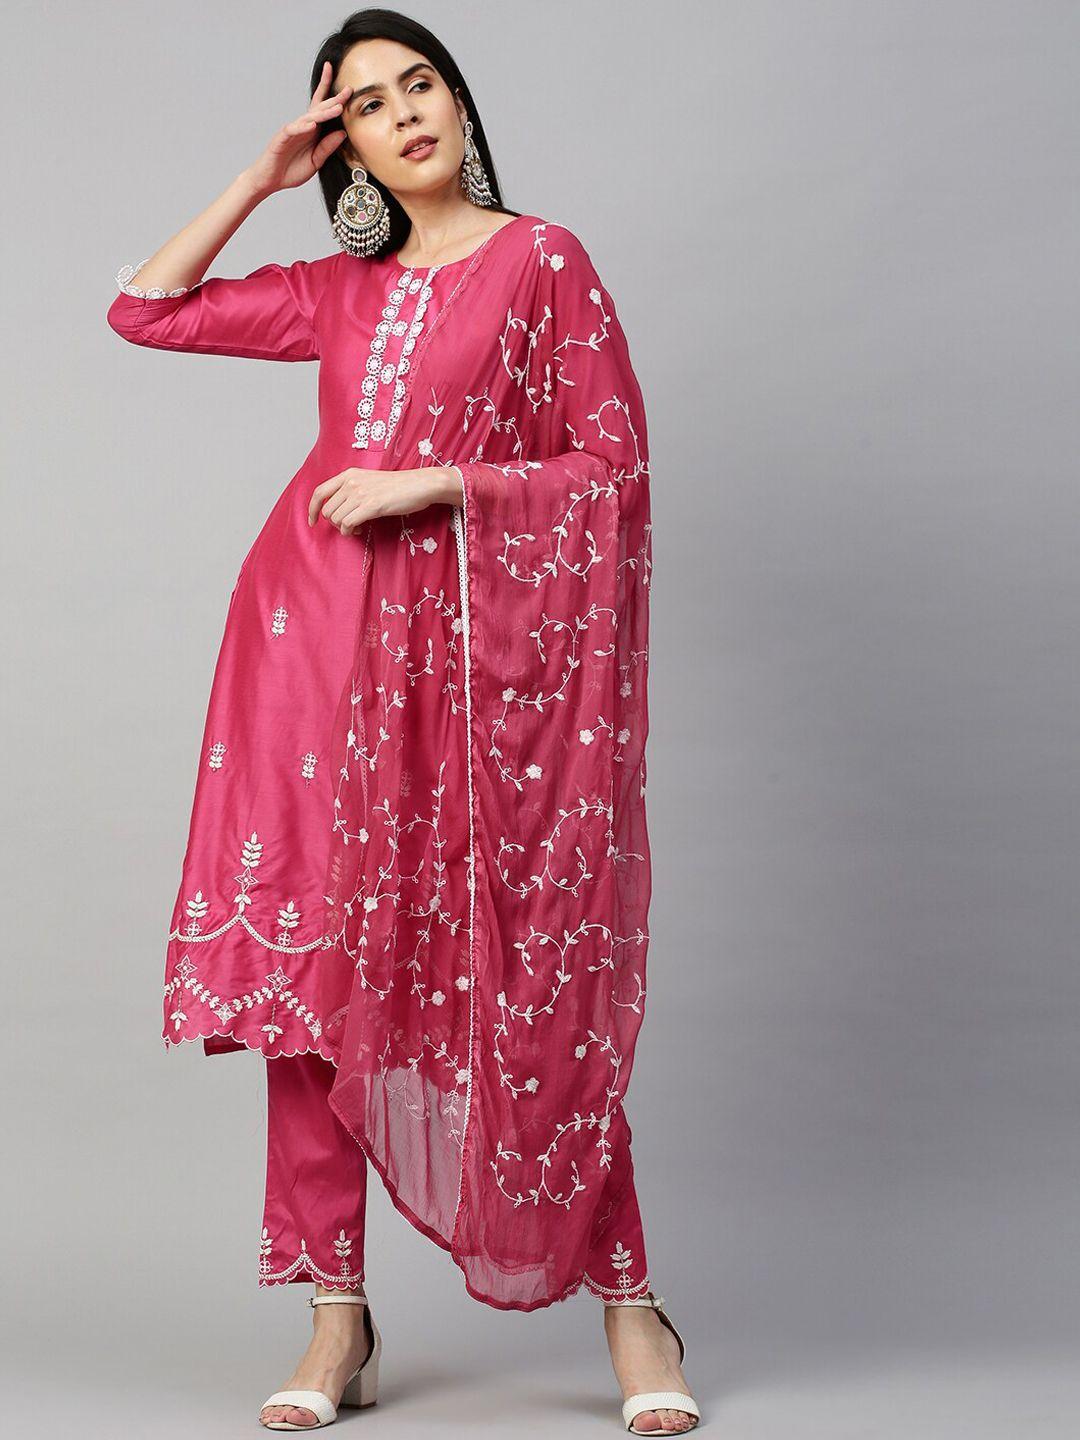 fashor-women-pink-floral-embroidered-thread-work-chanderi-cotton-kurta-with-trousers-&-with-dupatta